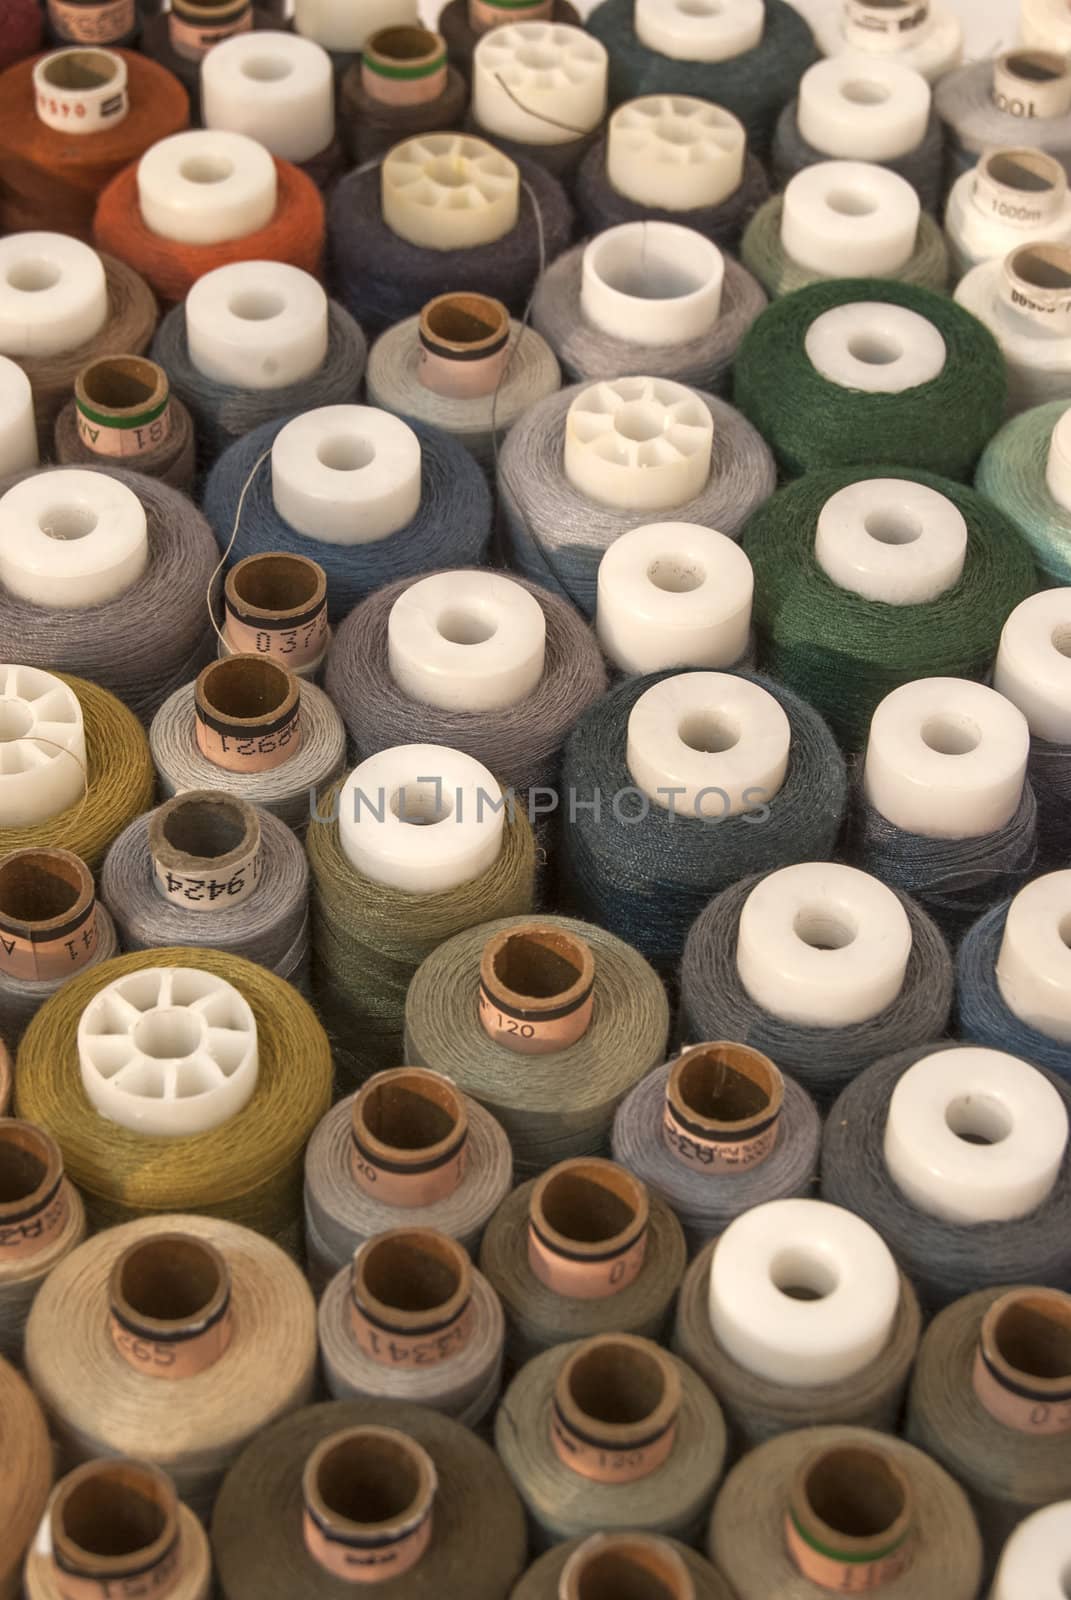 Different colored threads reels from above view as background